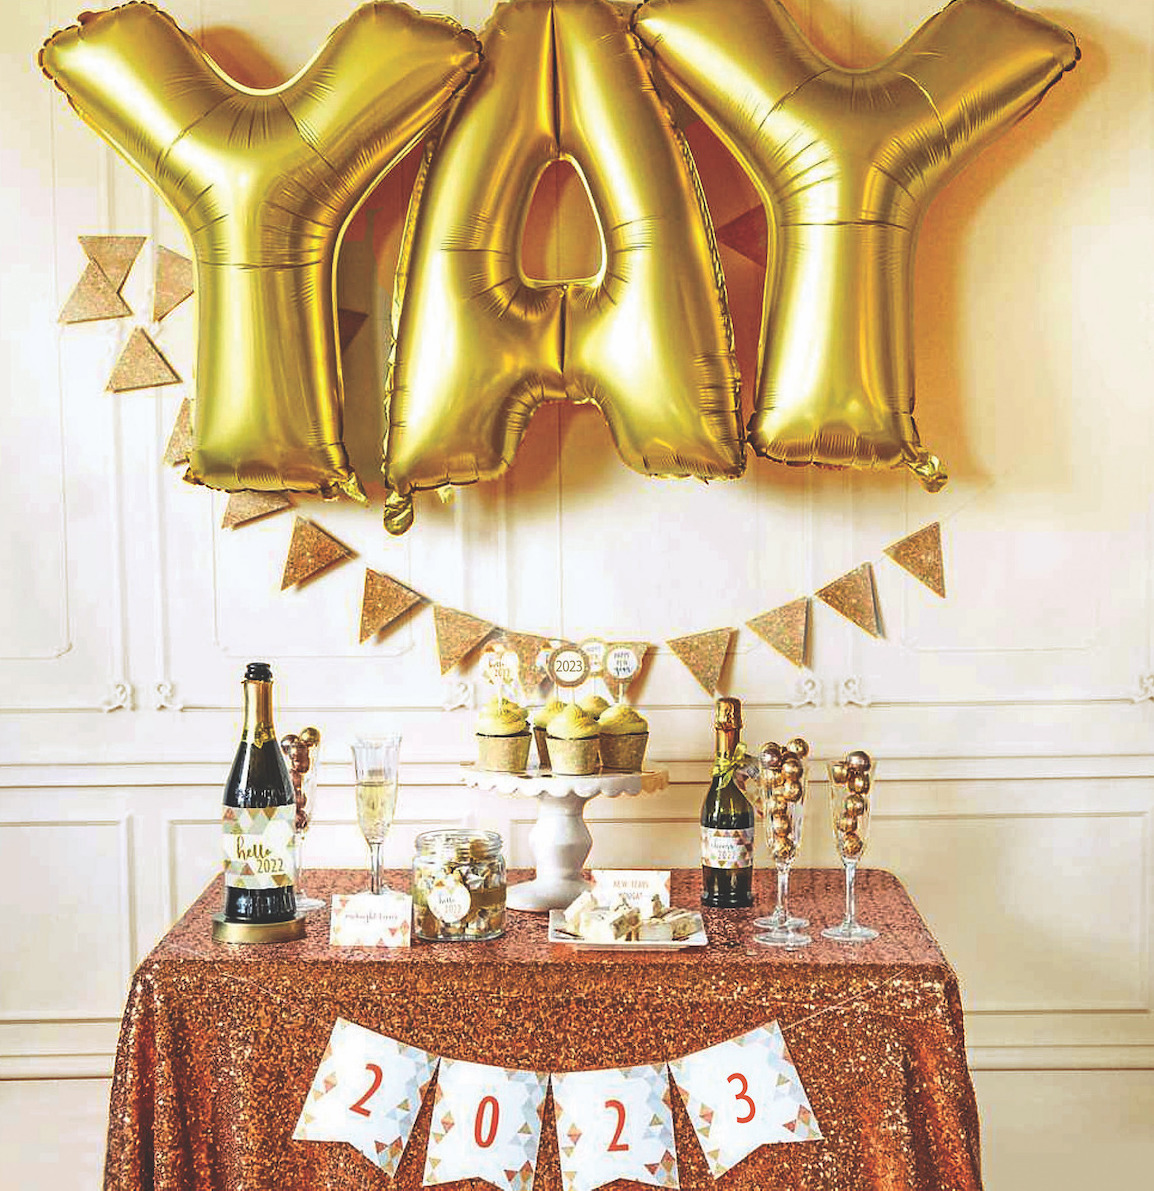 New Year's Eve party decorations with gold YAY balloons, champagne, cupcakes, and banners